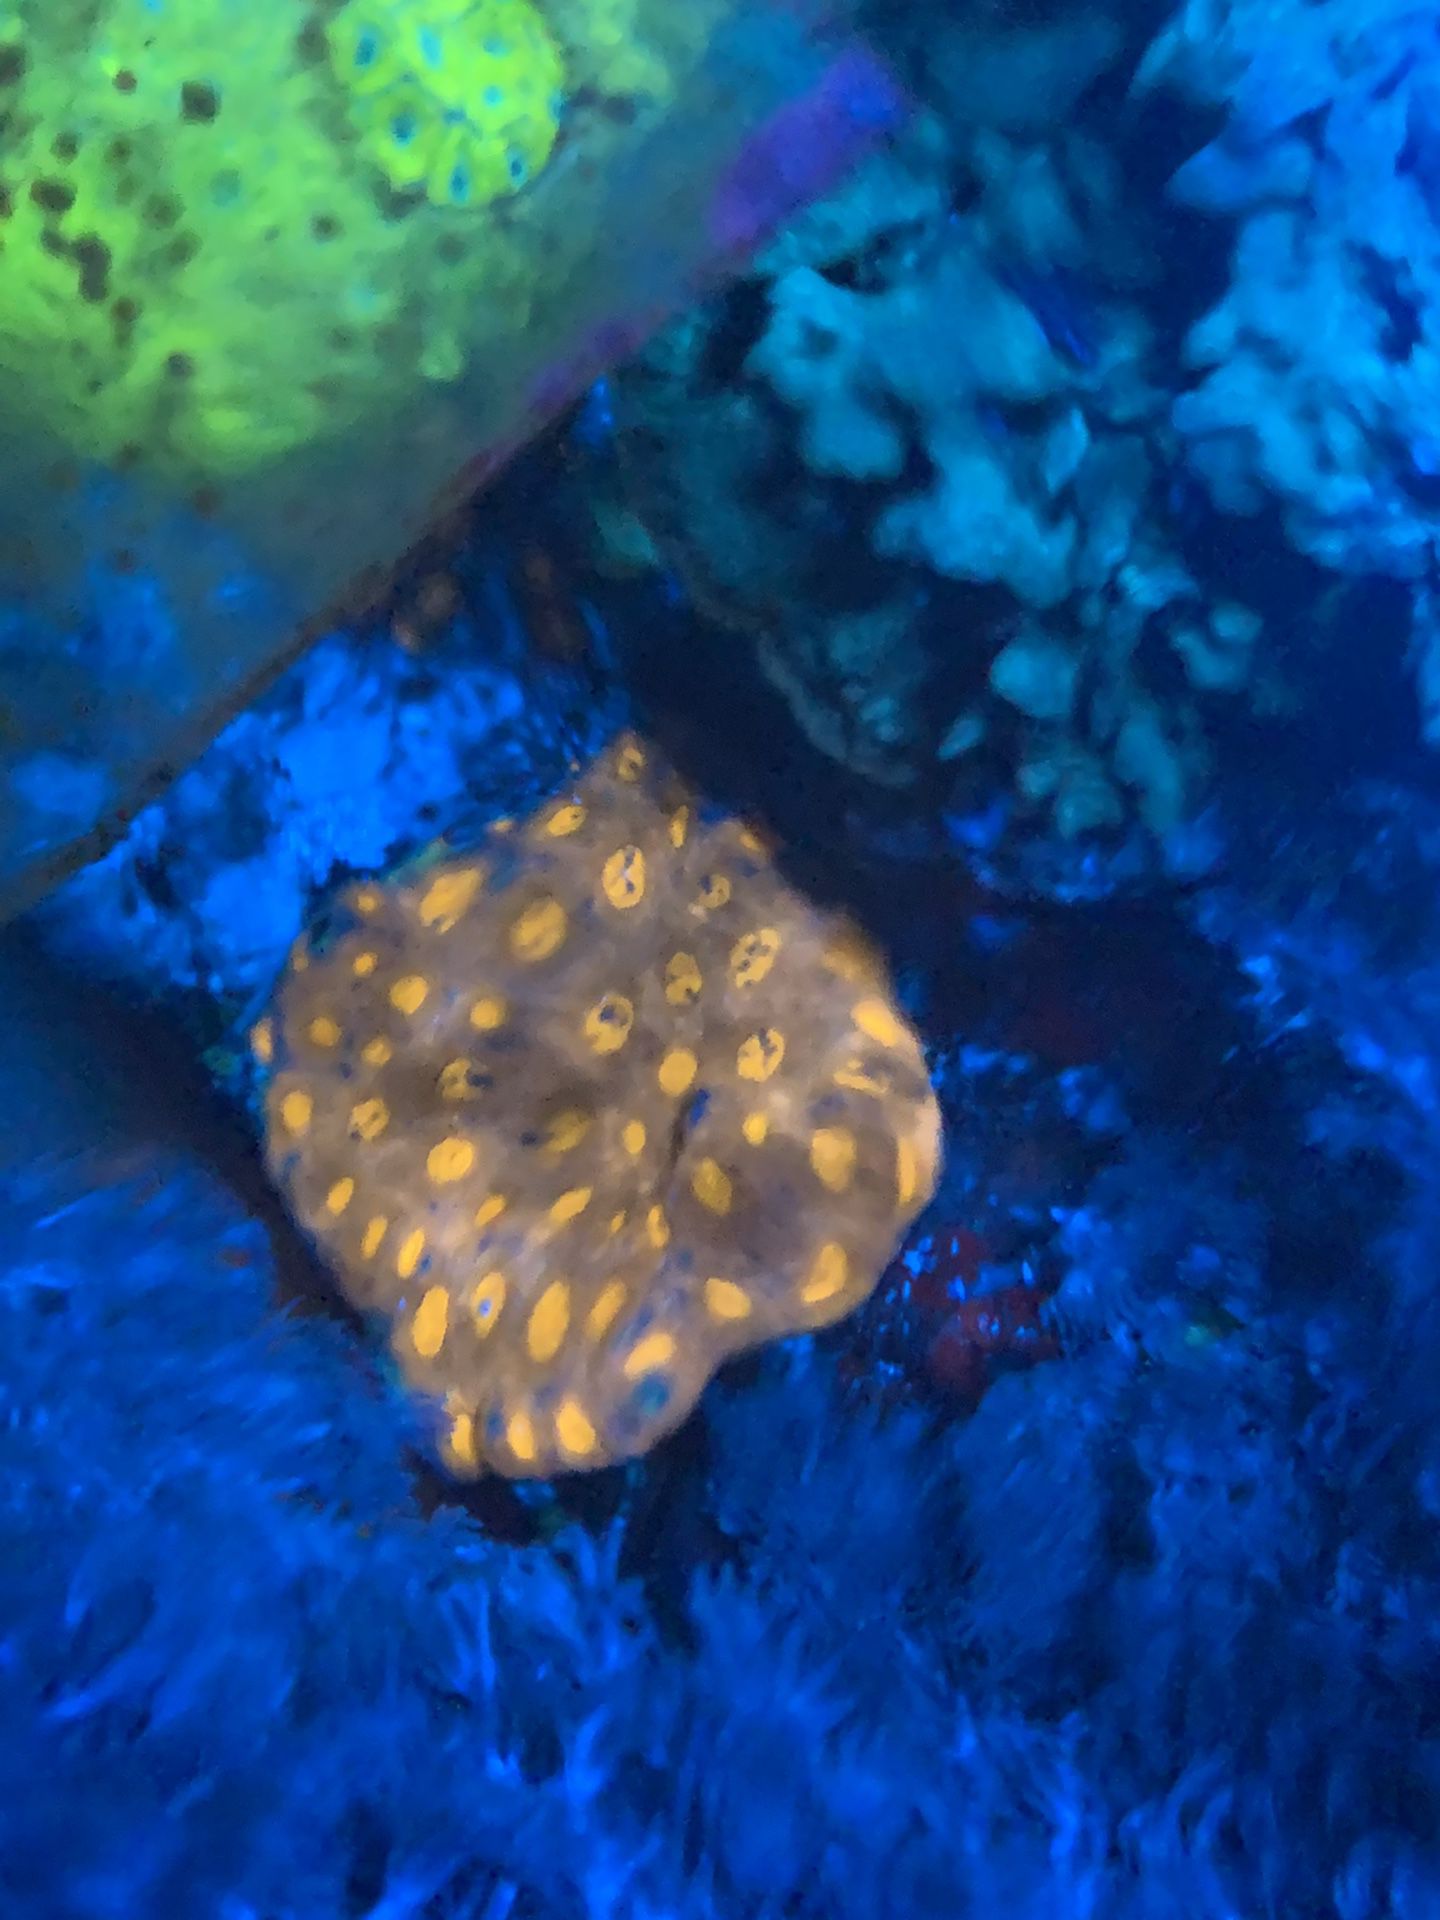 Acan coral